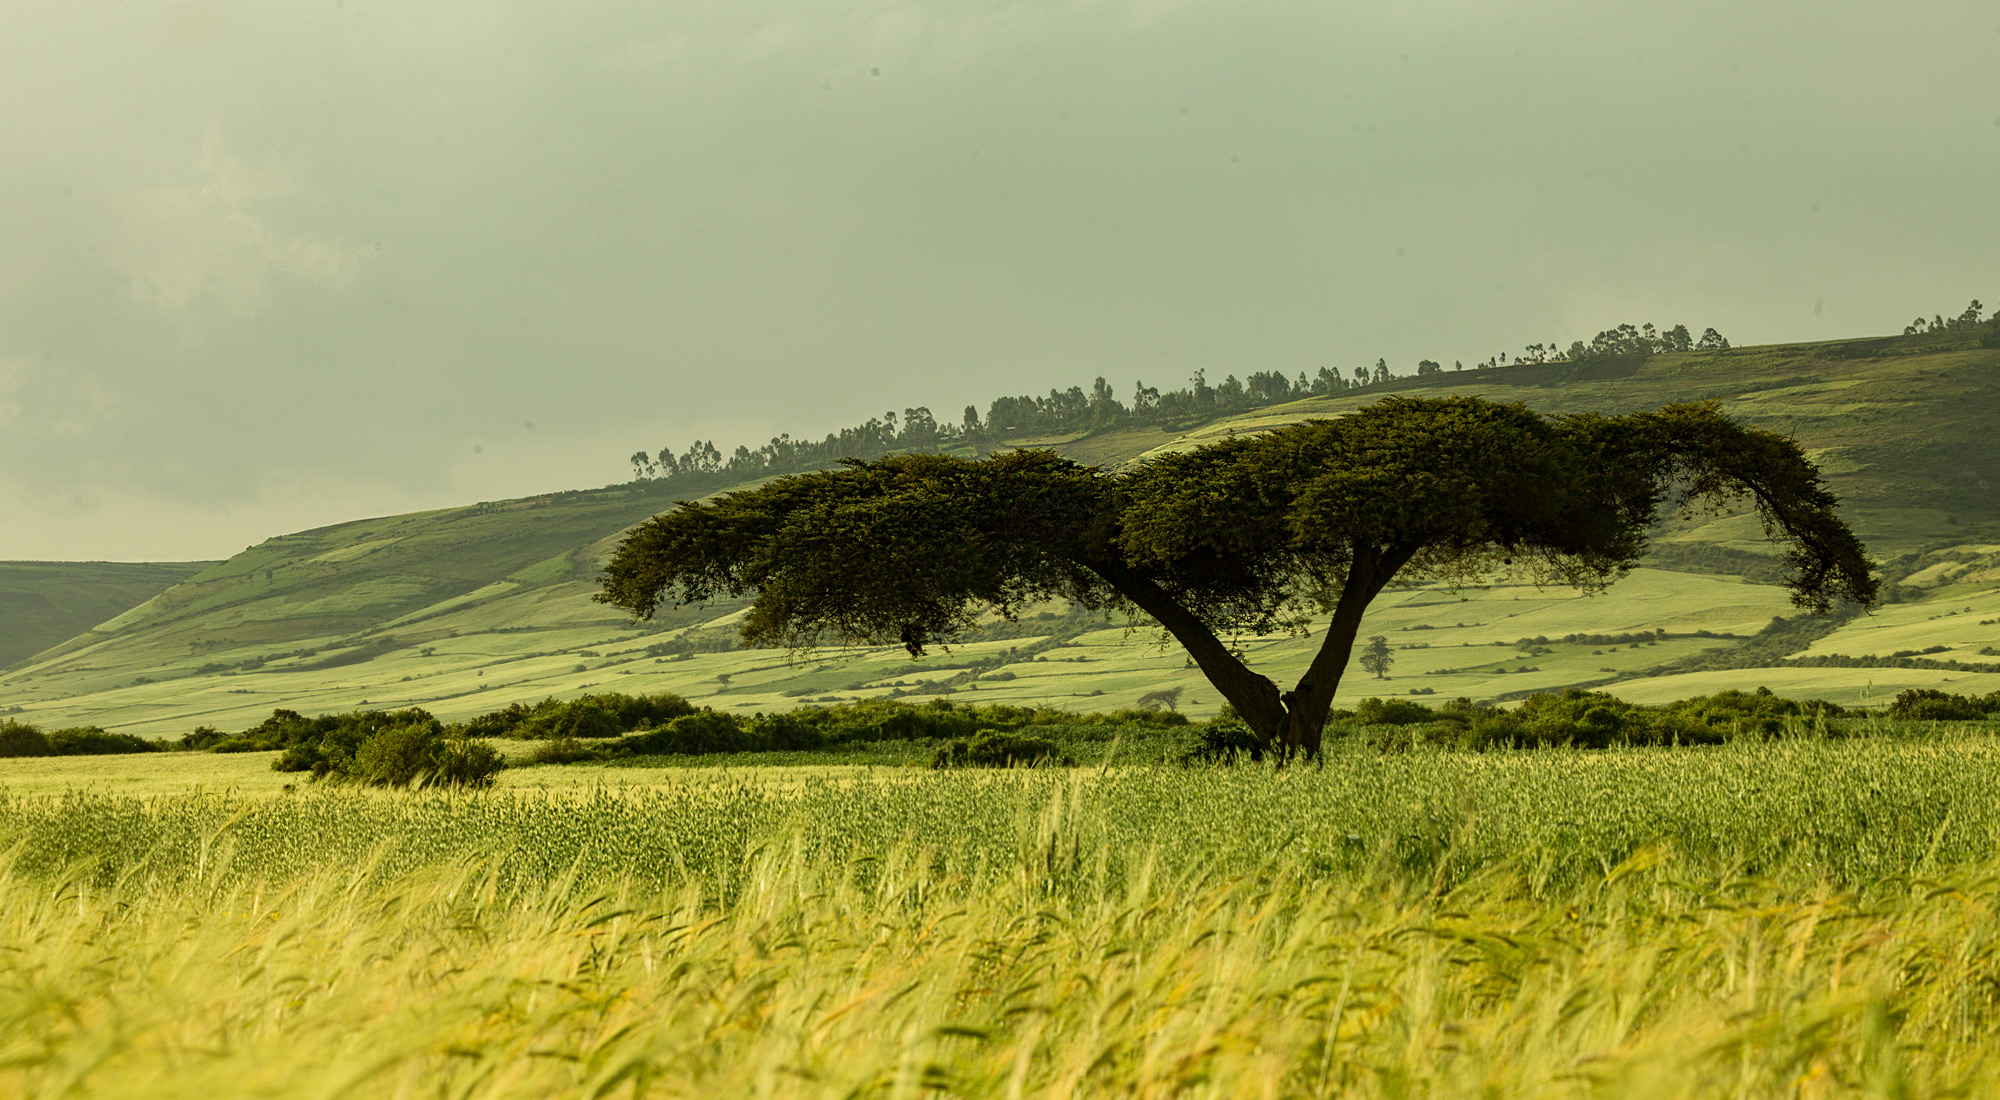 A stunning capture of Ethiopia's landscape with wheat fields © Christian Boix